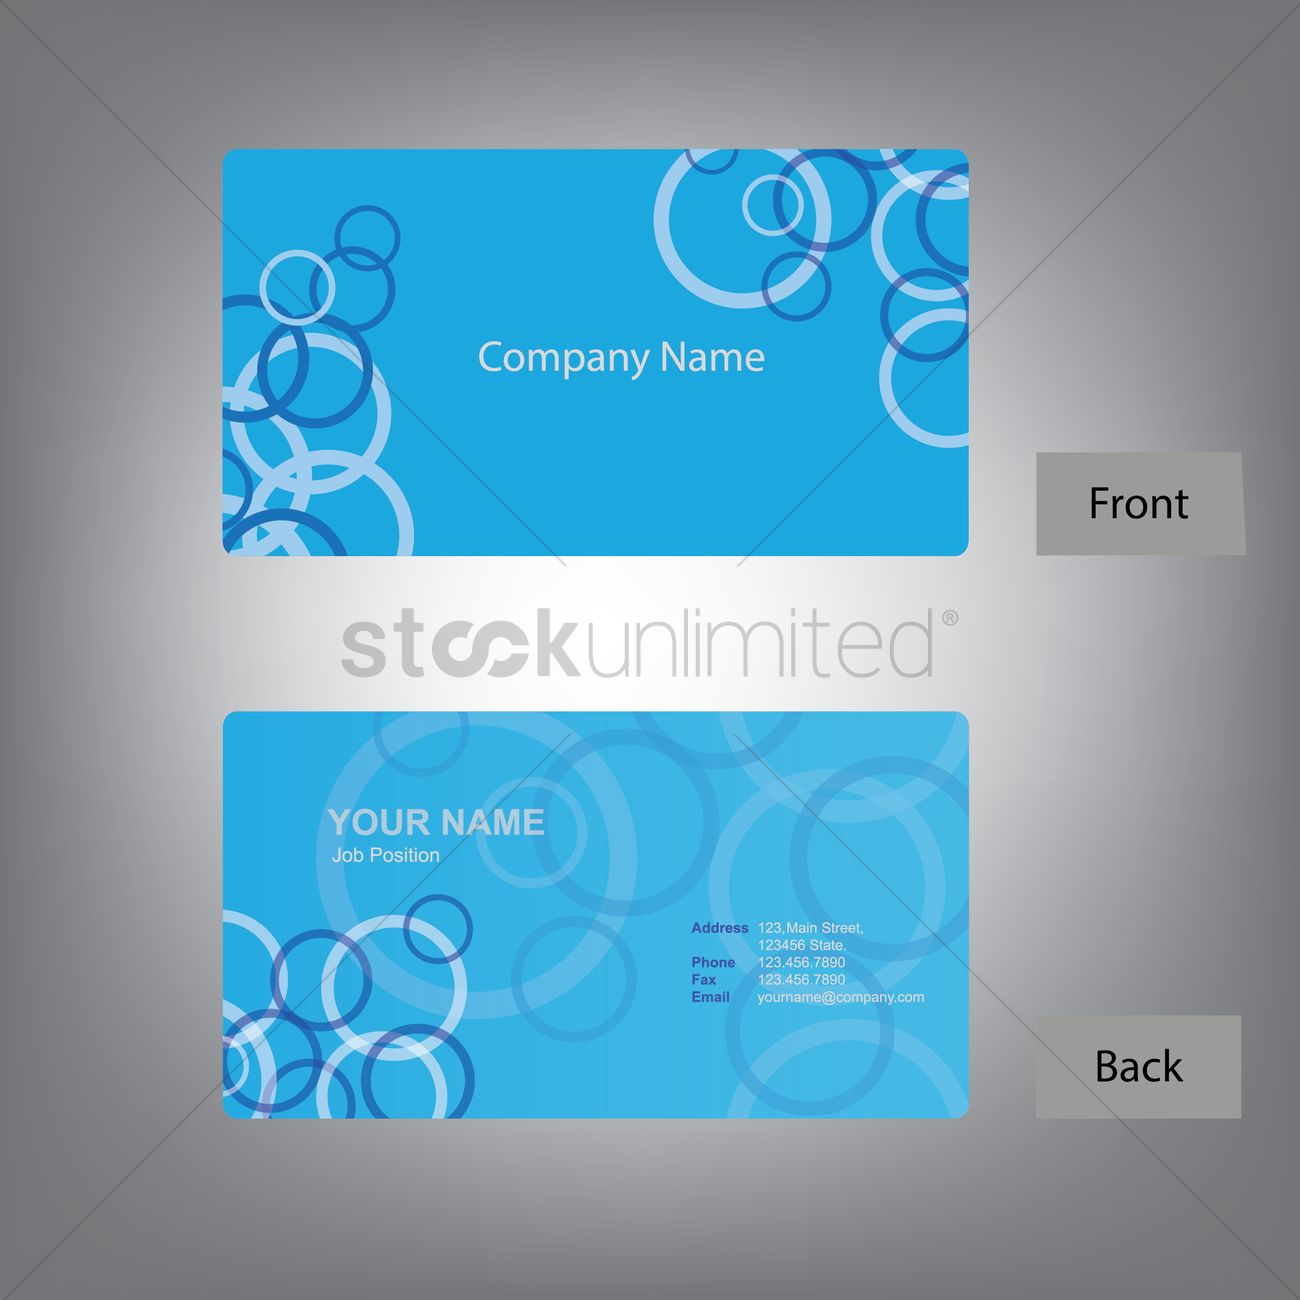 Business Card Front And Back Design Visiting Template Free Throughout Front And Back Business Card Template Word